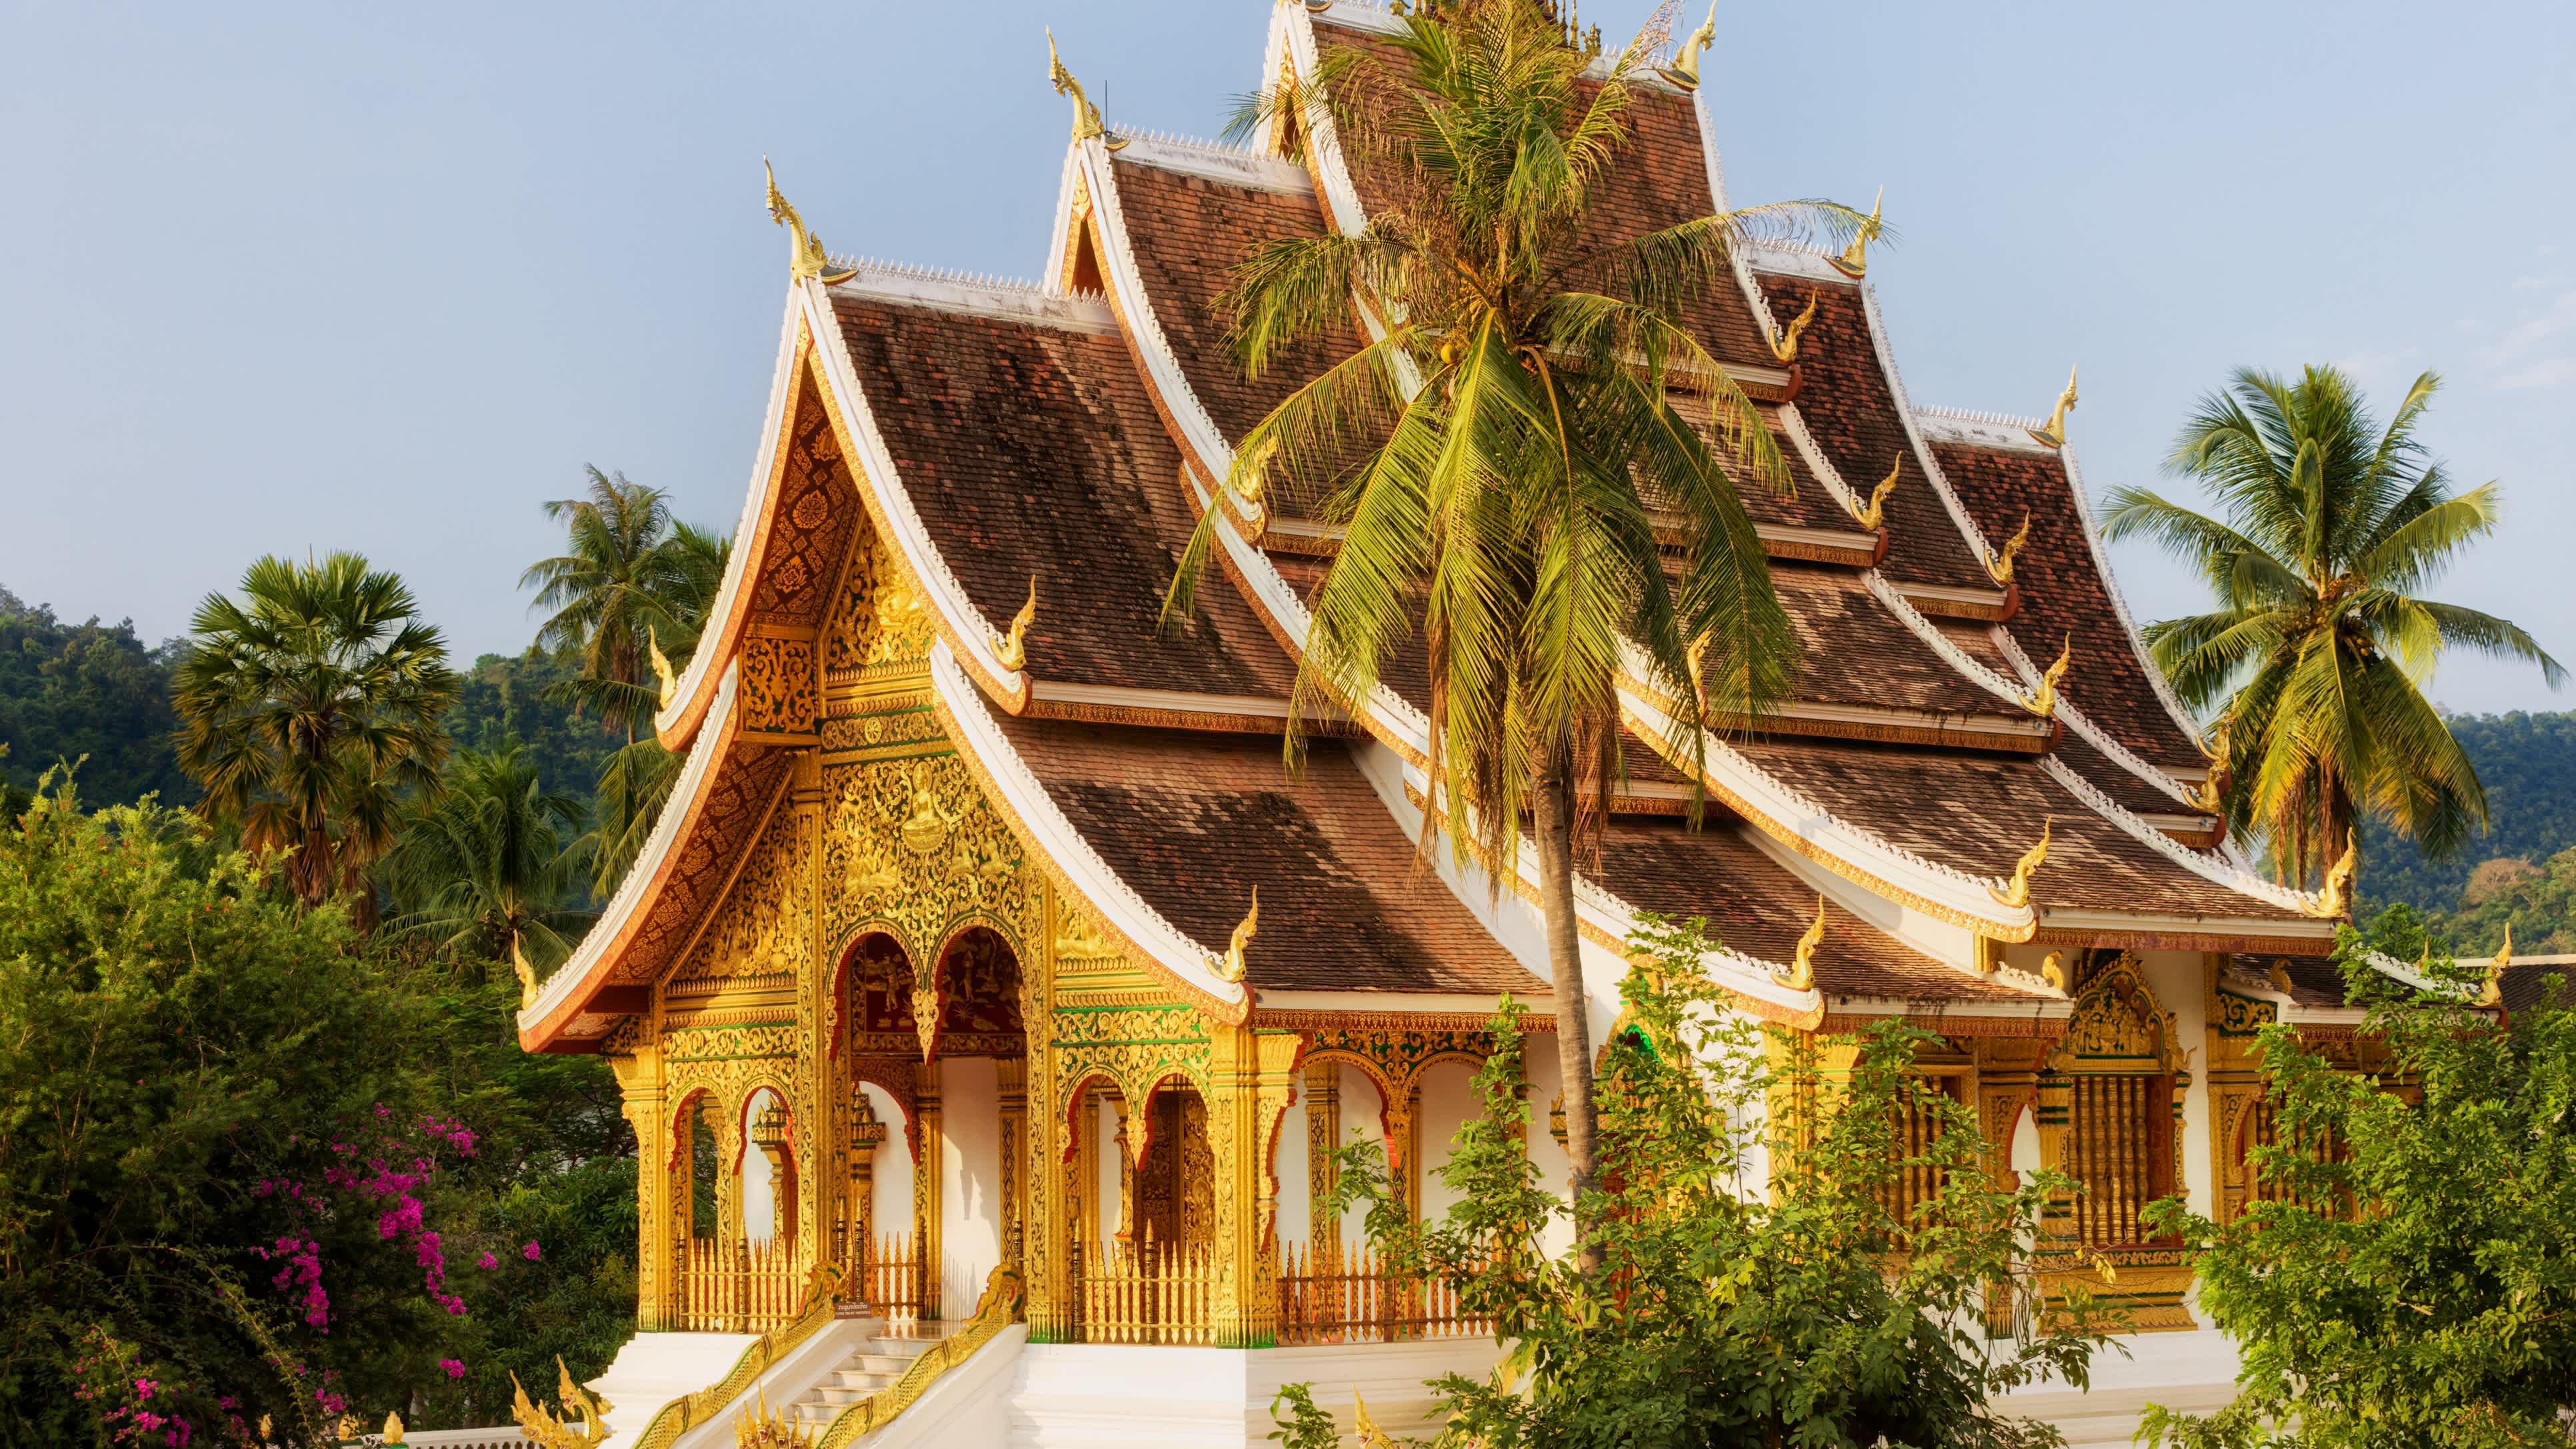 Take a chance and explore! Step away from the ordinary and experience something extraordinary in Luang Prabang - vietnam cambodia laos itinerary